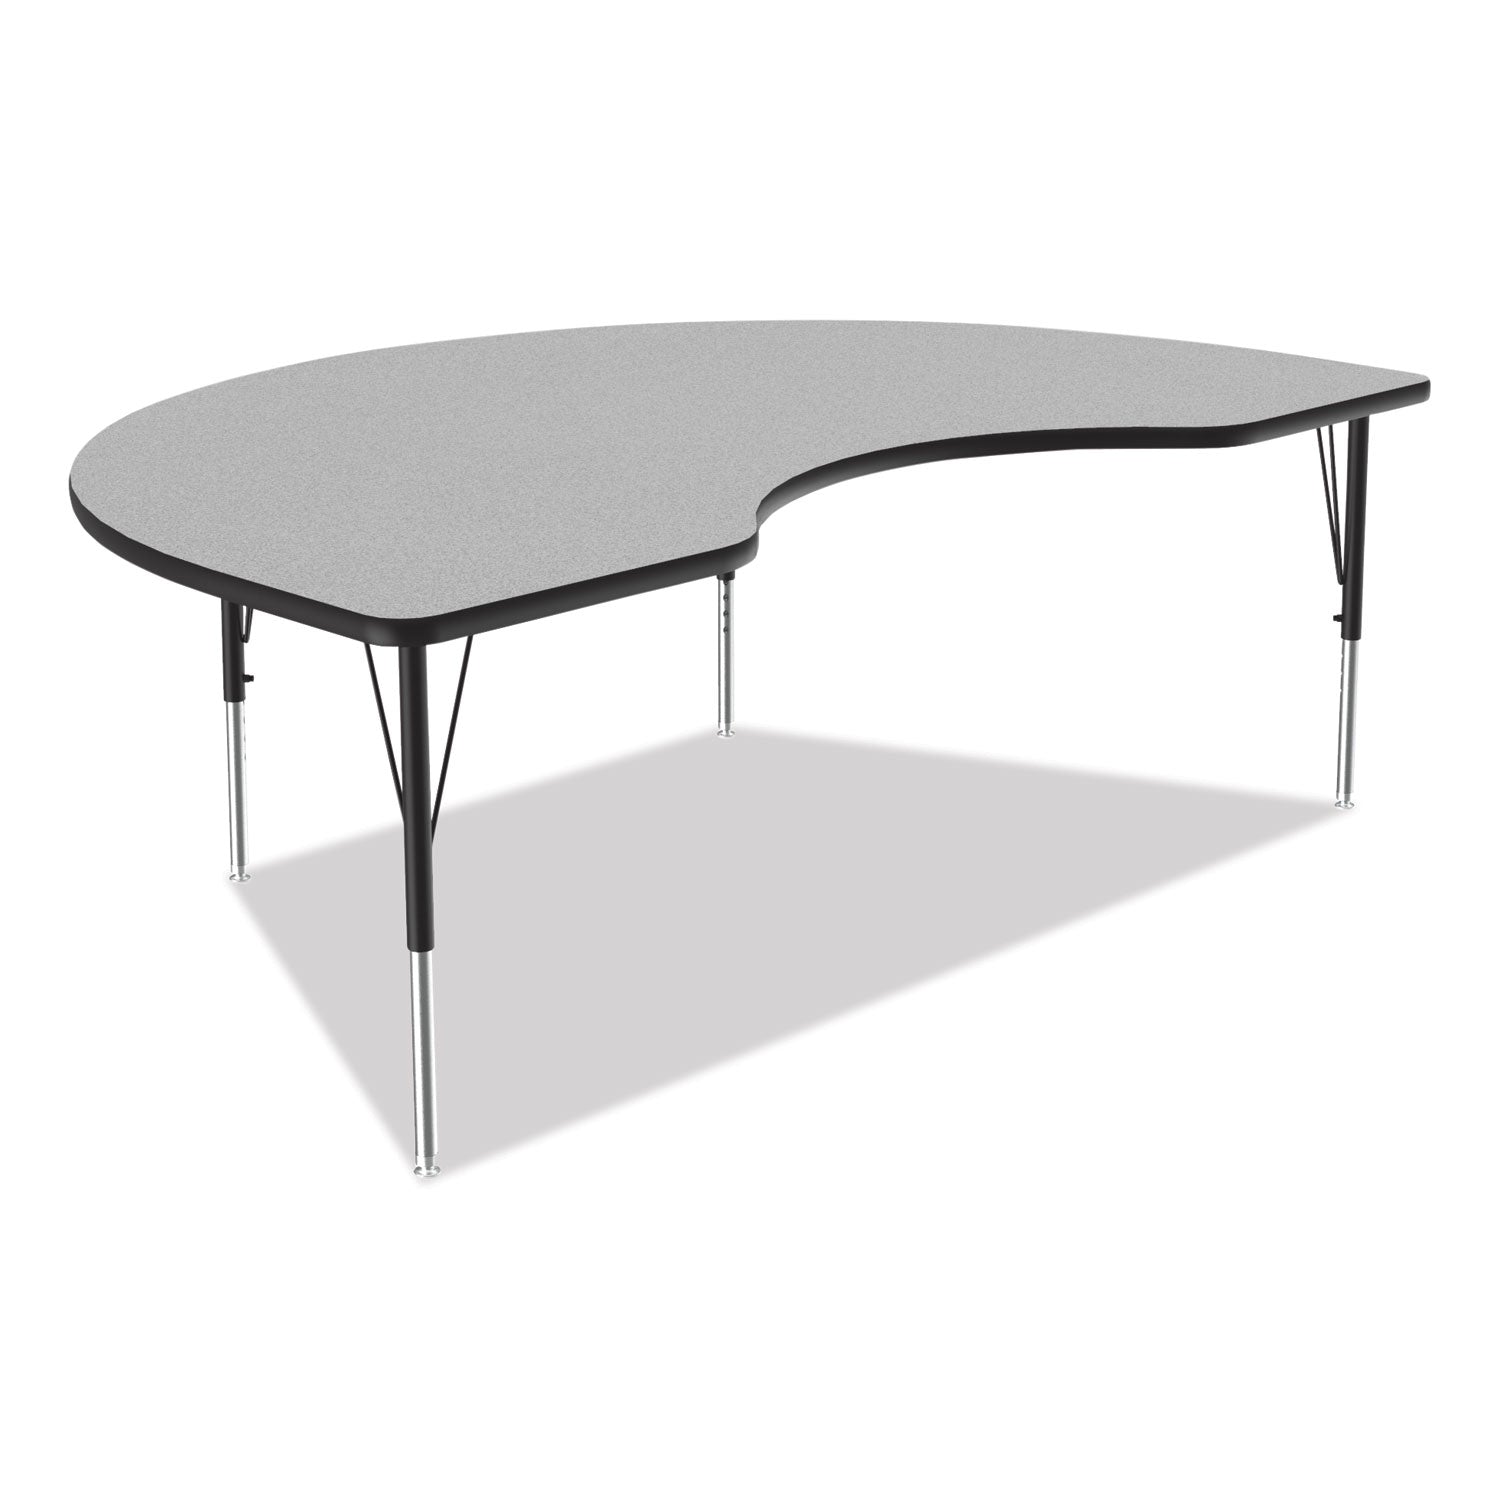 adjustable-activity-tables-kidney-shaped-72-x-48-x-19-to-29-gray-top-black-legs-4-pallet-ships-in-4-6-business-days_crl4872tf1595k4 - 6